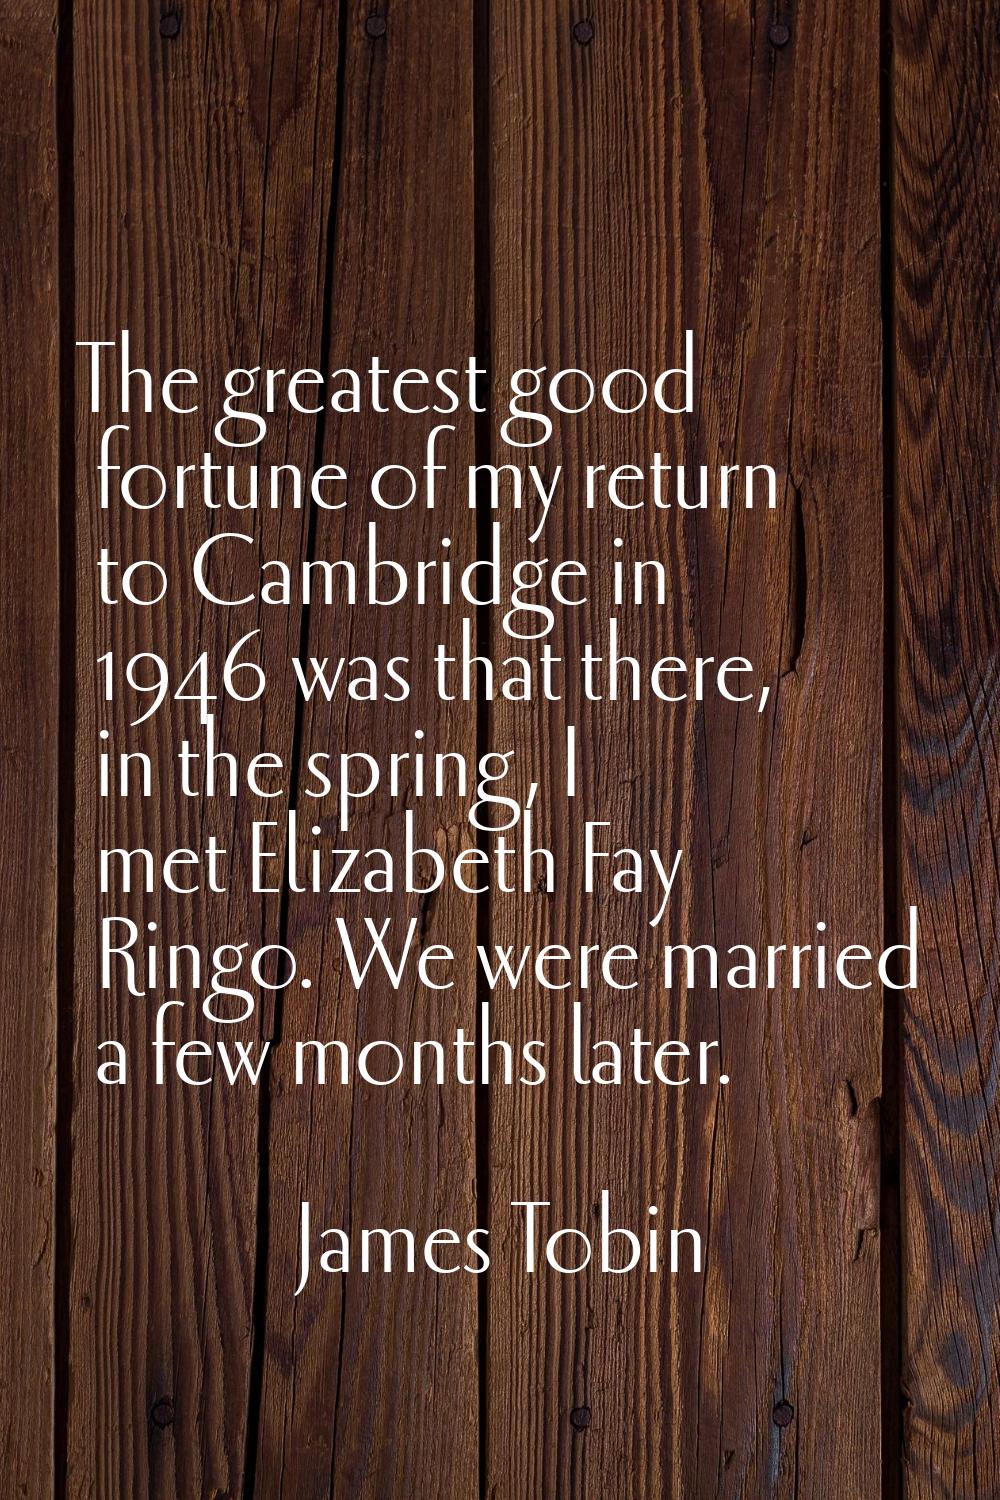 The greatest good fortune of my return to Cambridge in 1946 was that there, in the spring, I met El